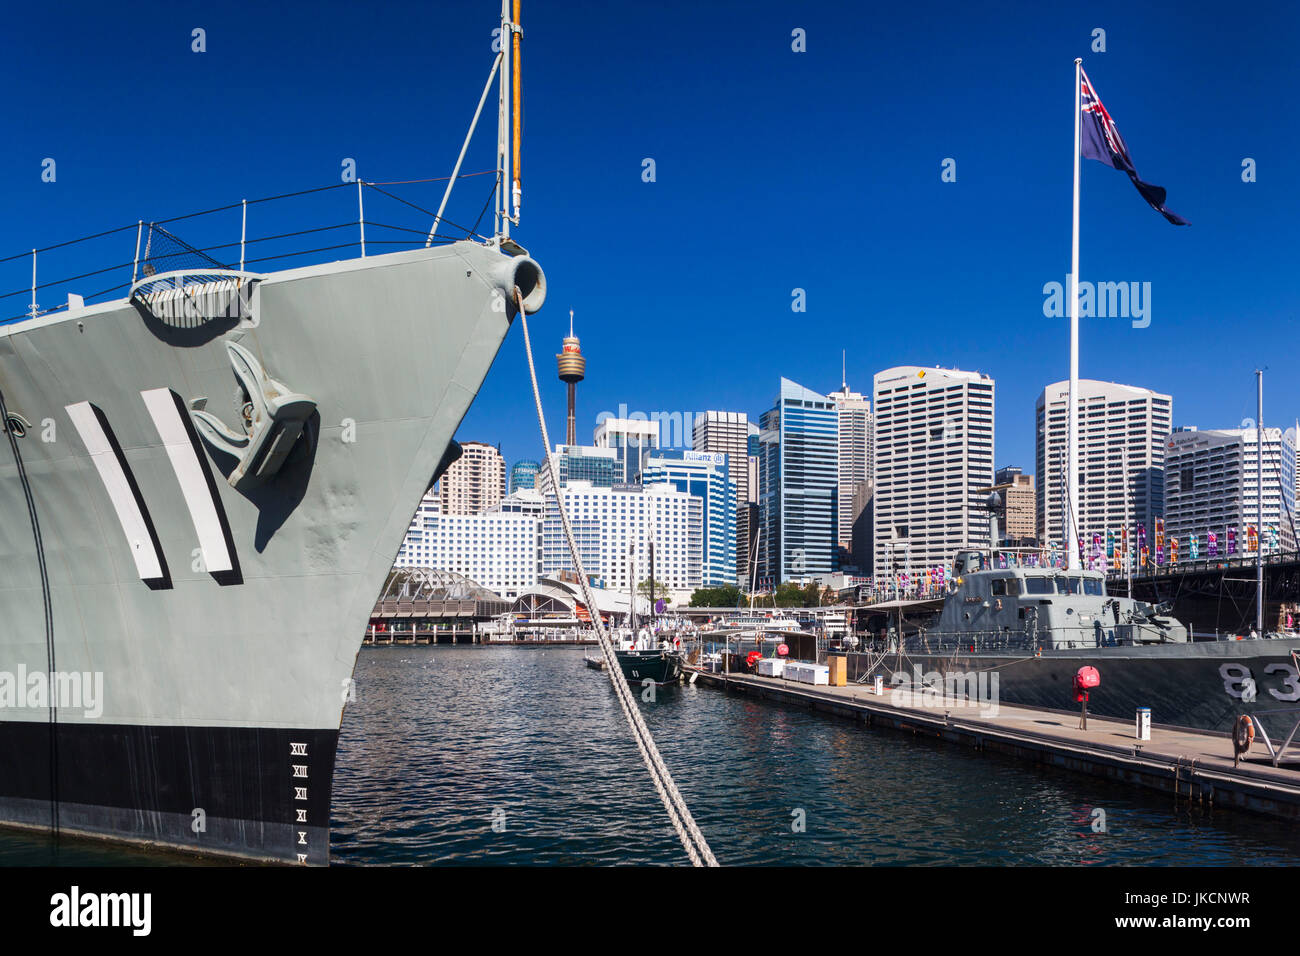 Australia, New South Wales, NSW, Sydney, Darling Harbour, Australian National Maritime Museum Stock Photo